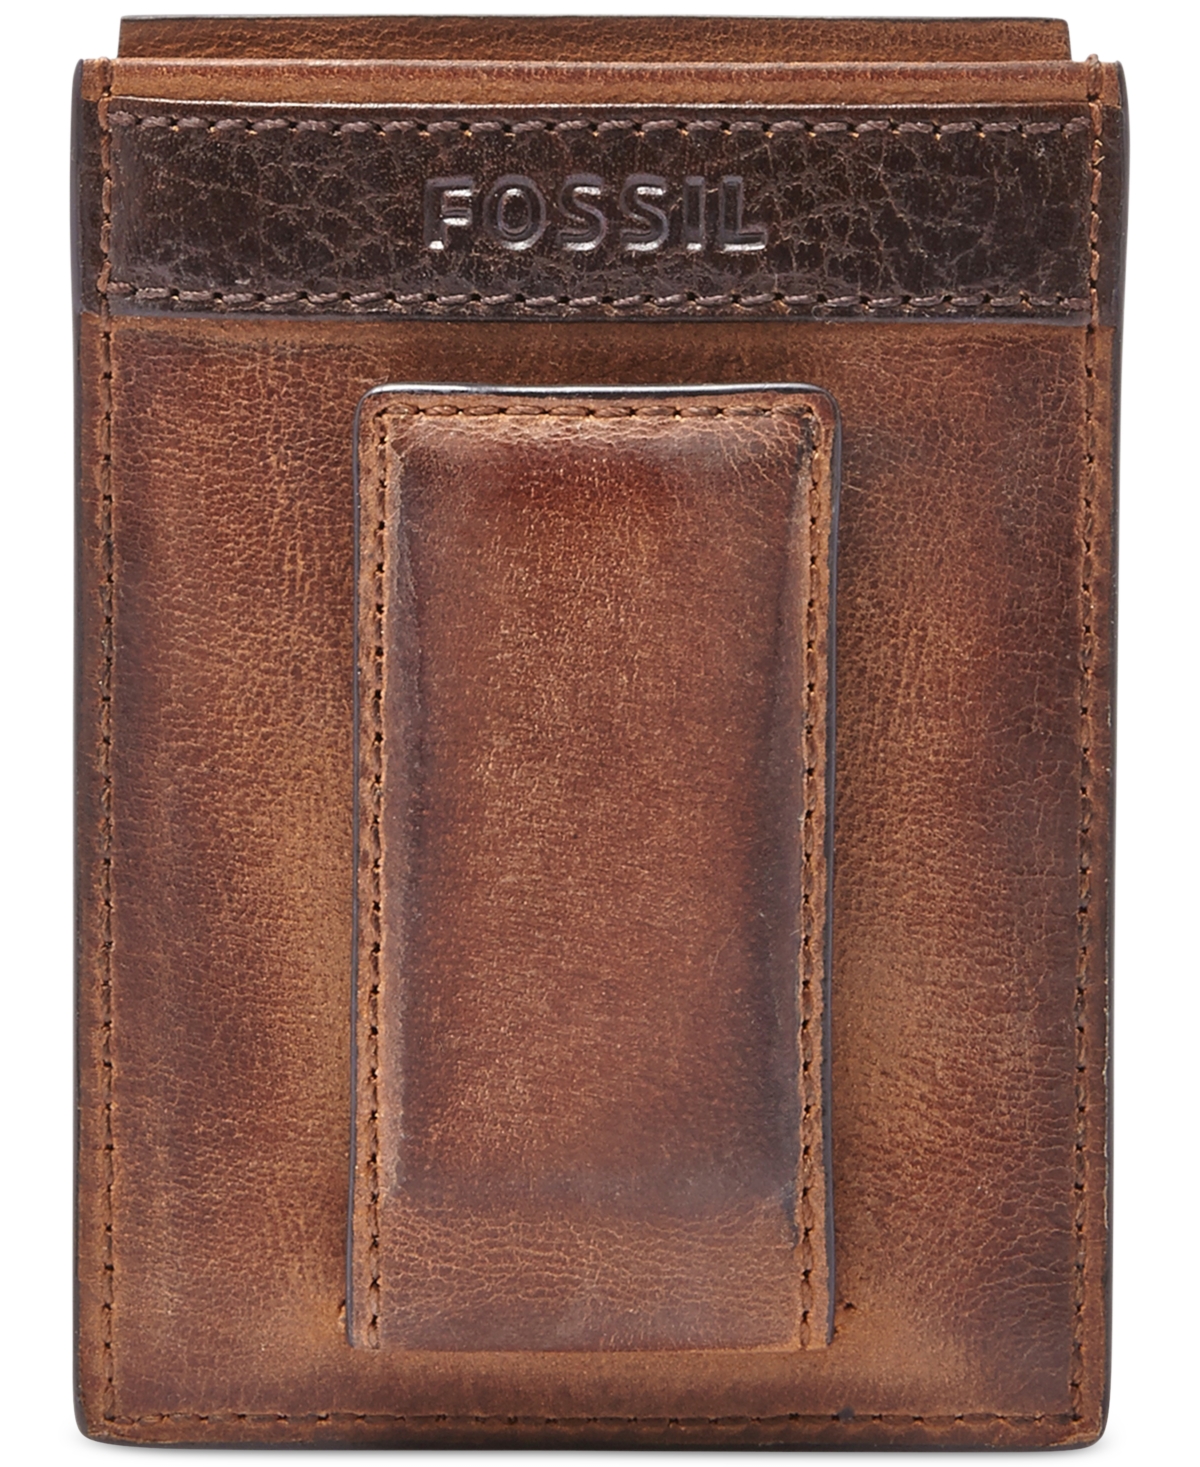 UPC 762346315407 product image for Men's Fossil Quinn Magnetic Card Case Leather Wallet | upcitemdb.com